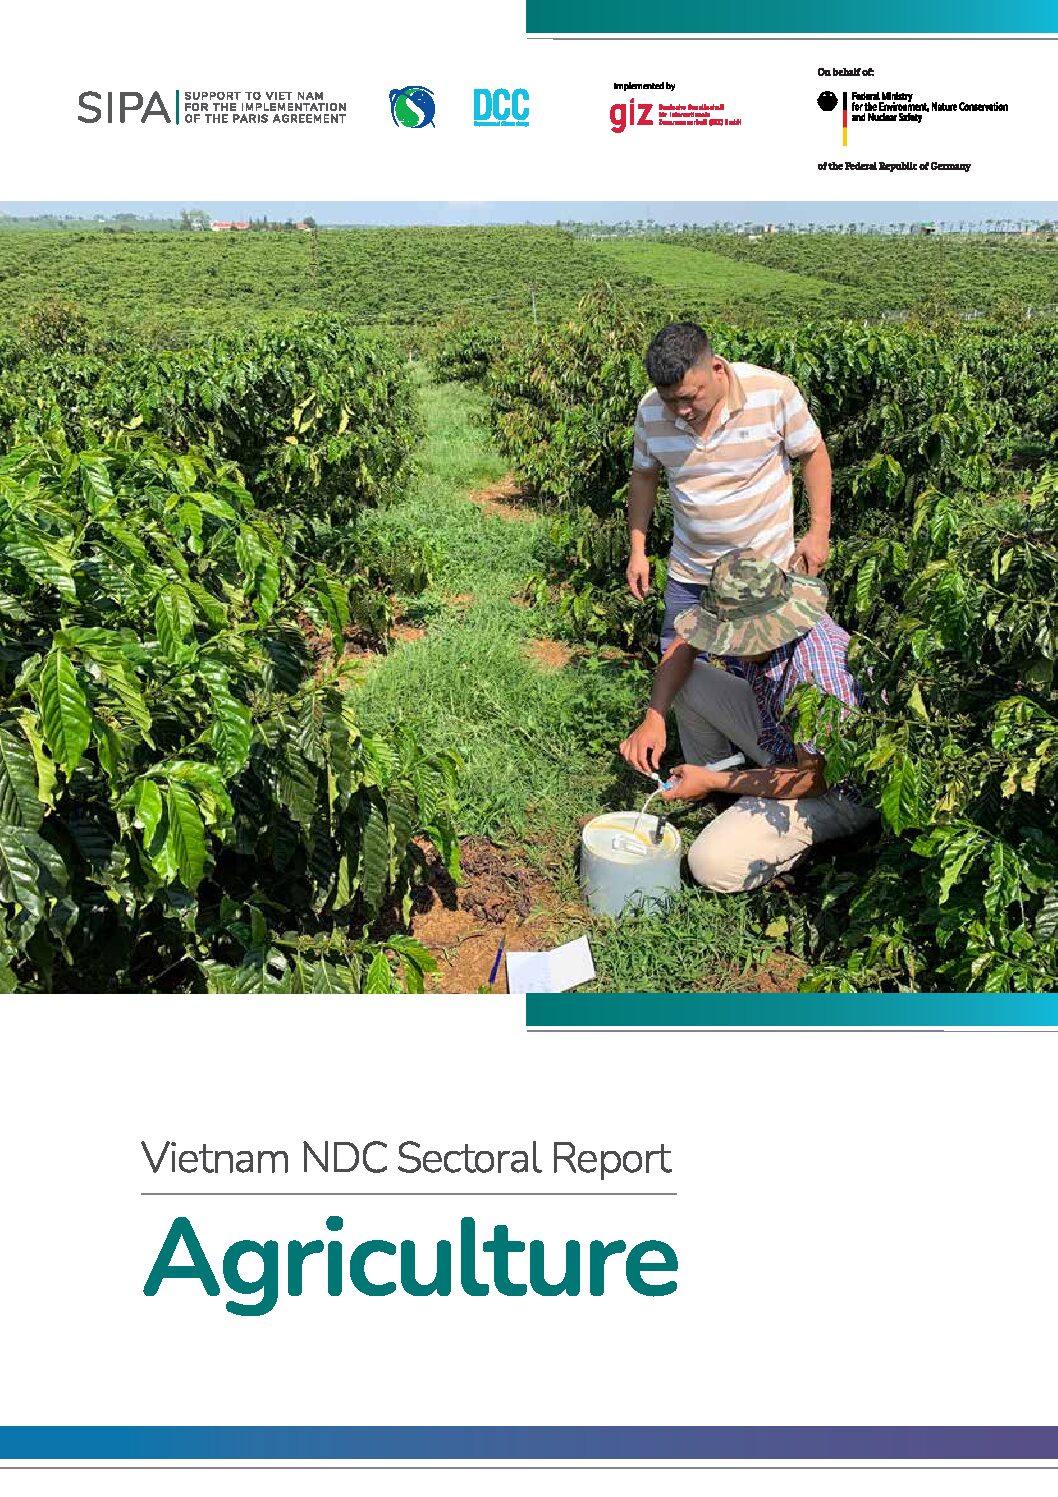 Vietnam NDC Sectoral Report – Agriculture